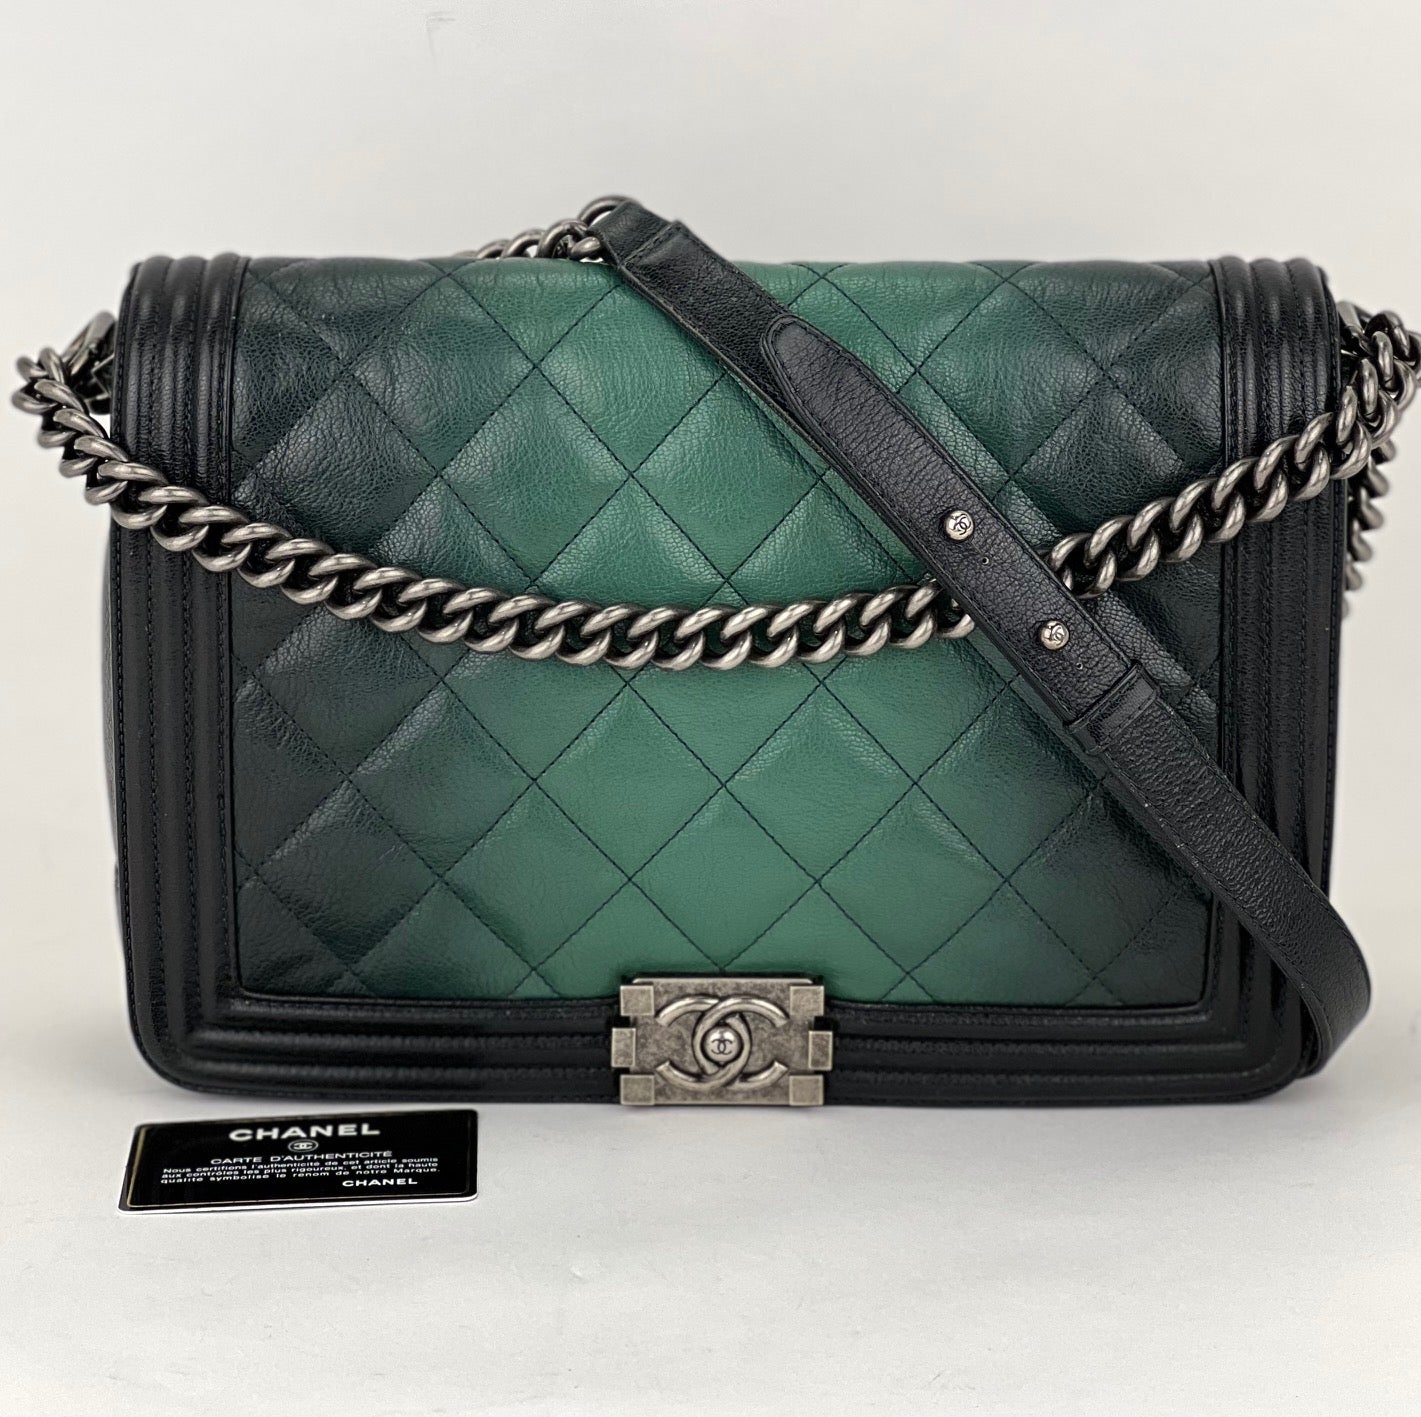 CHANEL Bag Dark Green Ombre Quilted Glazed Leather Large Boy Authentic preowned - 1